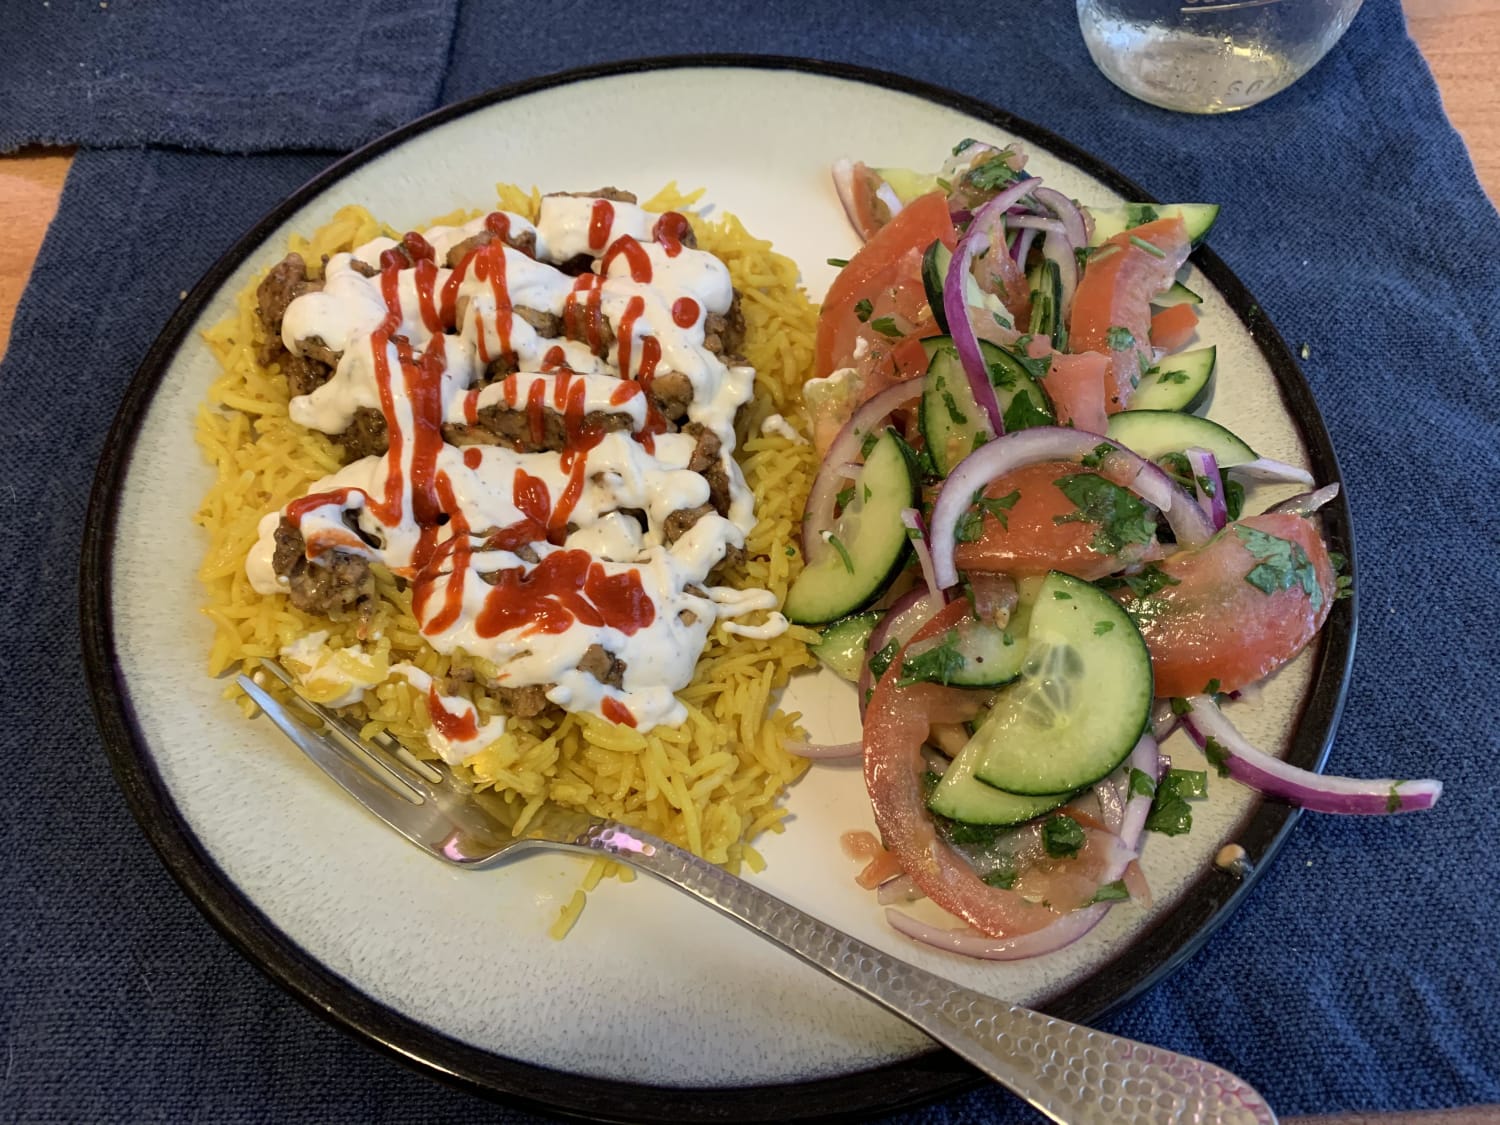 Made the Halal cart chicken and rice with a couple modifications. More in comments!